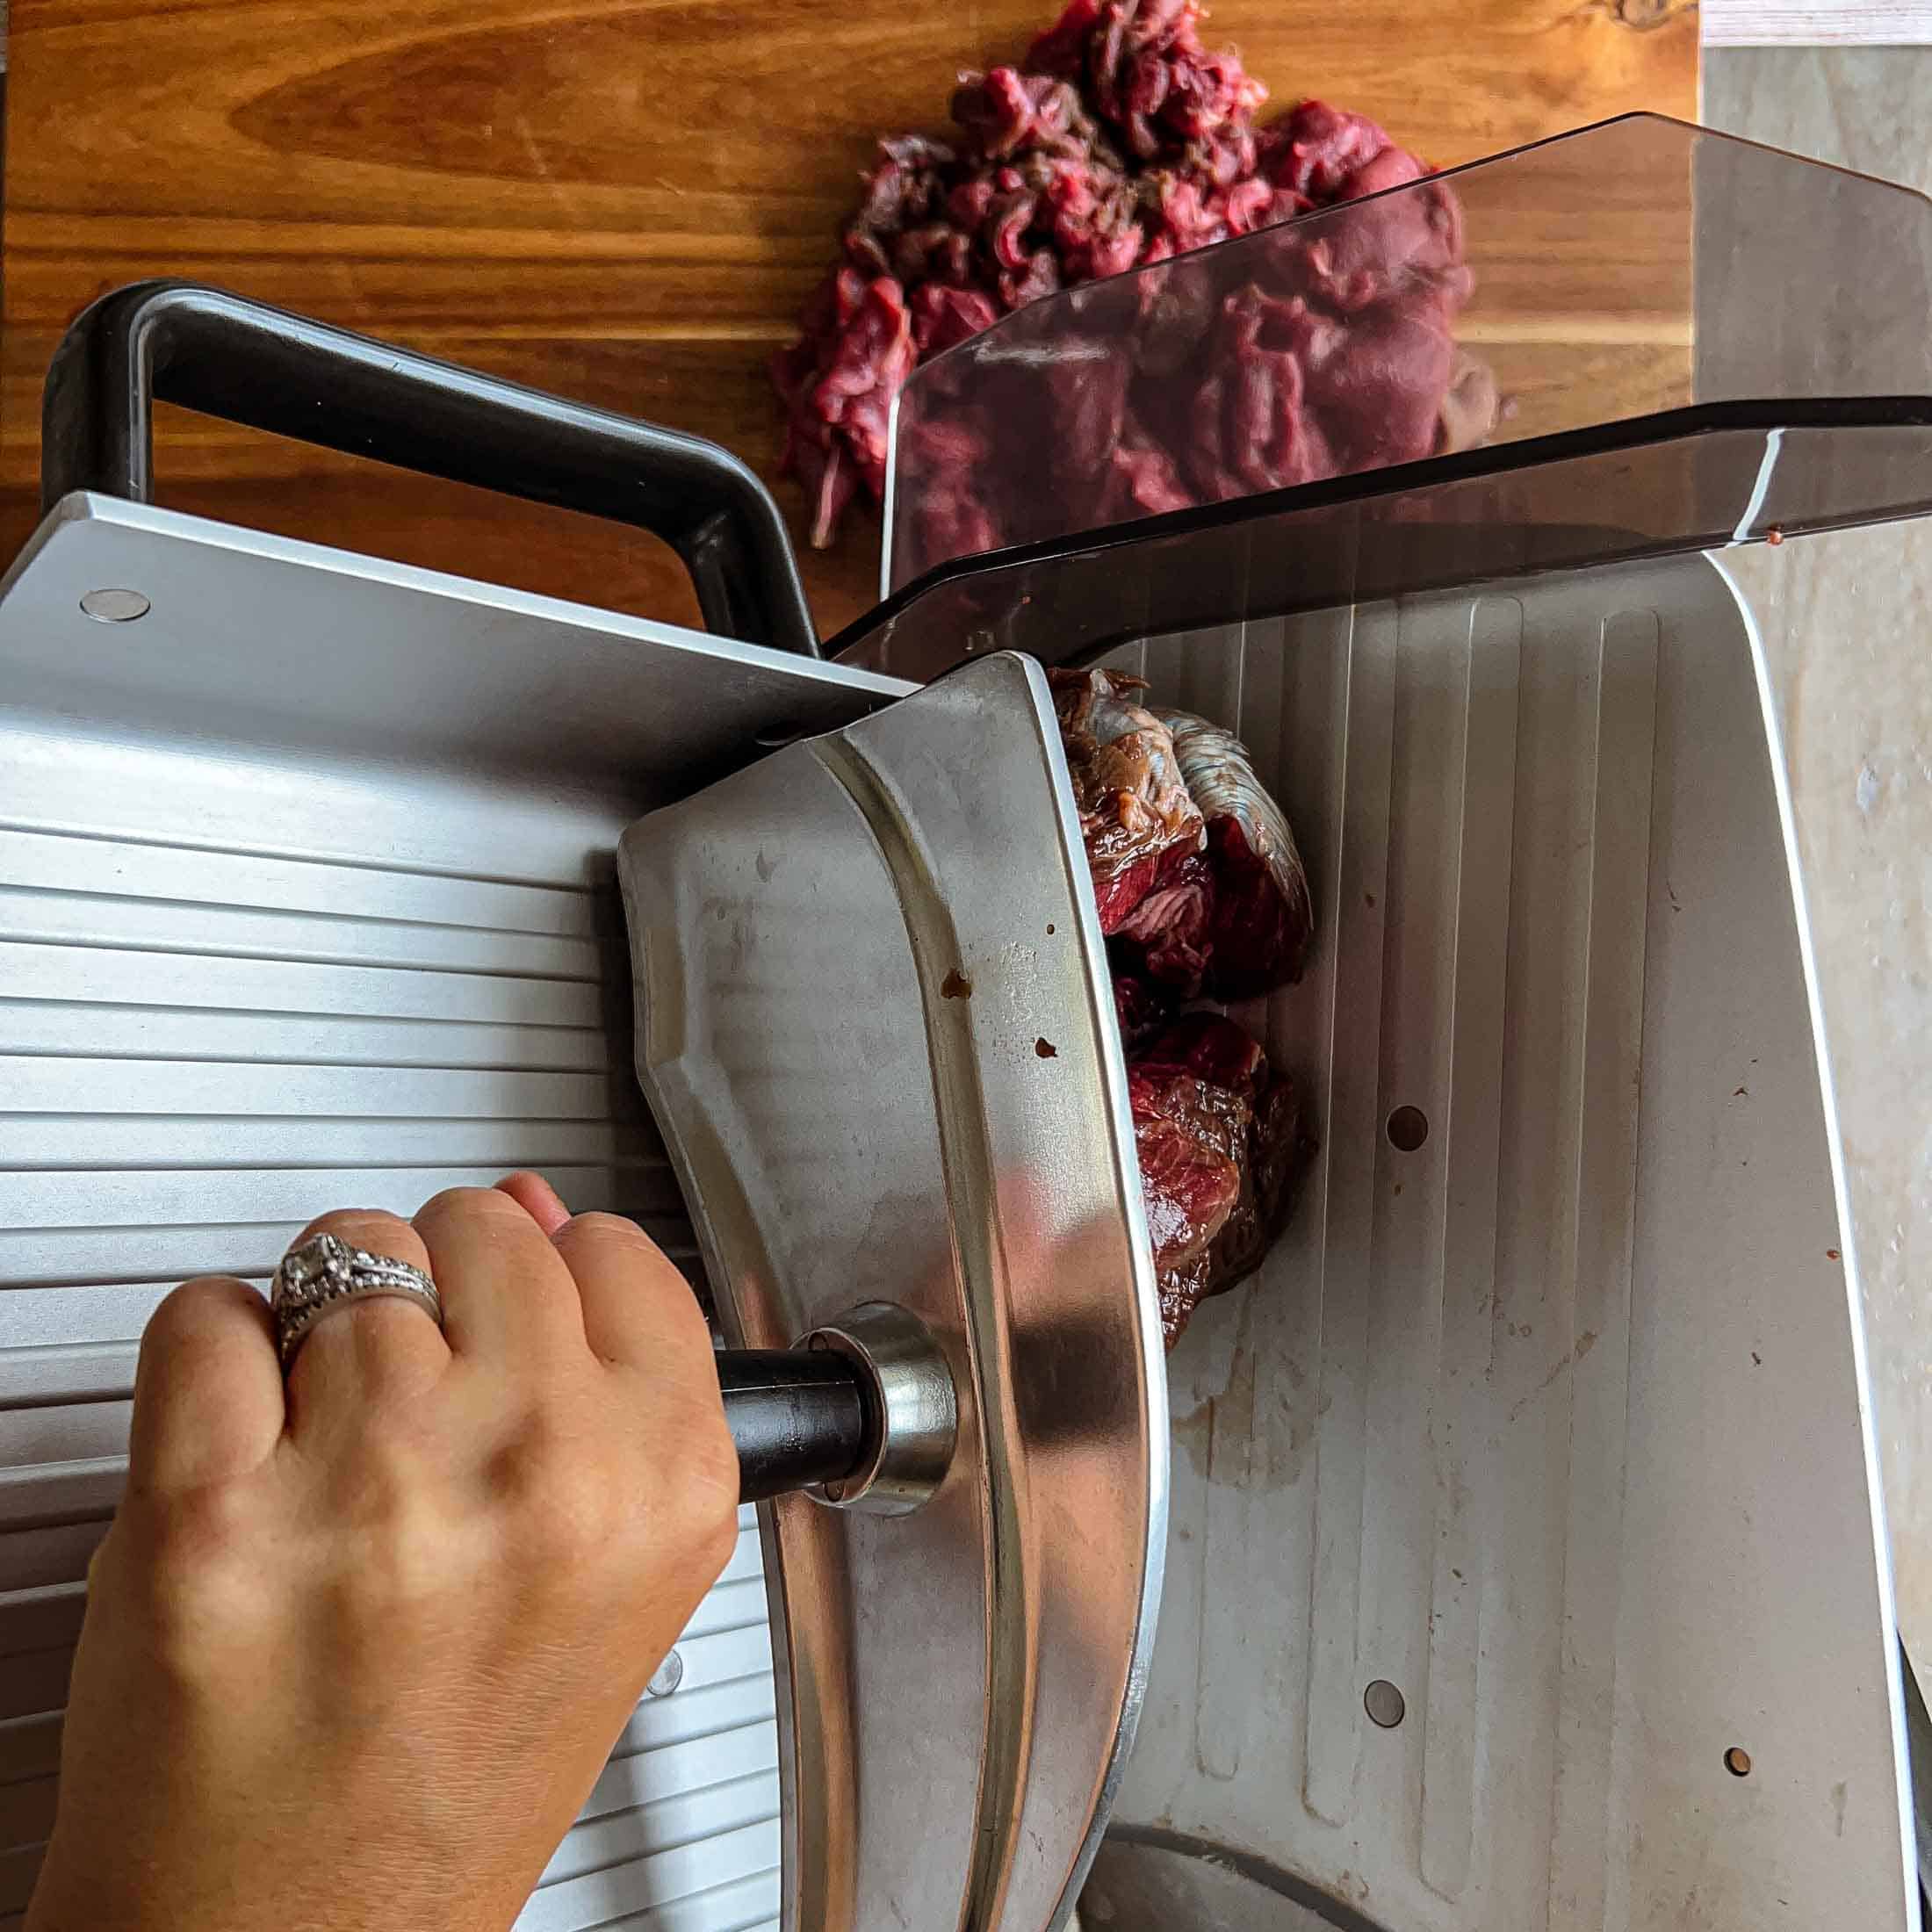 Raw venison roast being pushed through a meat slicer.